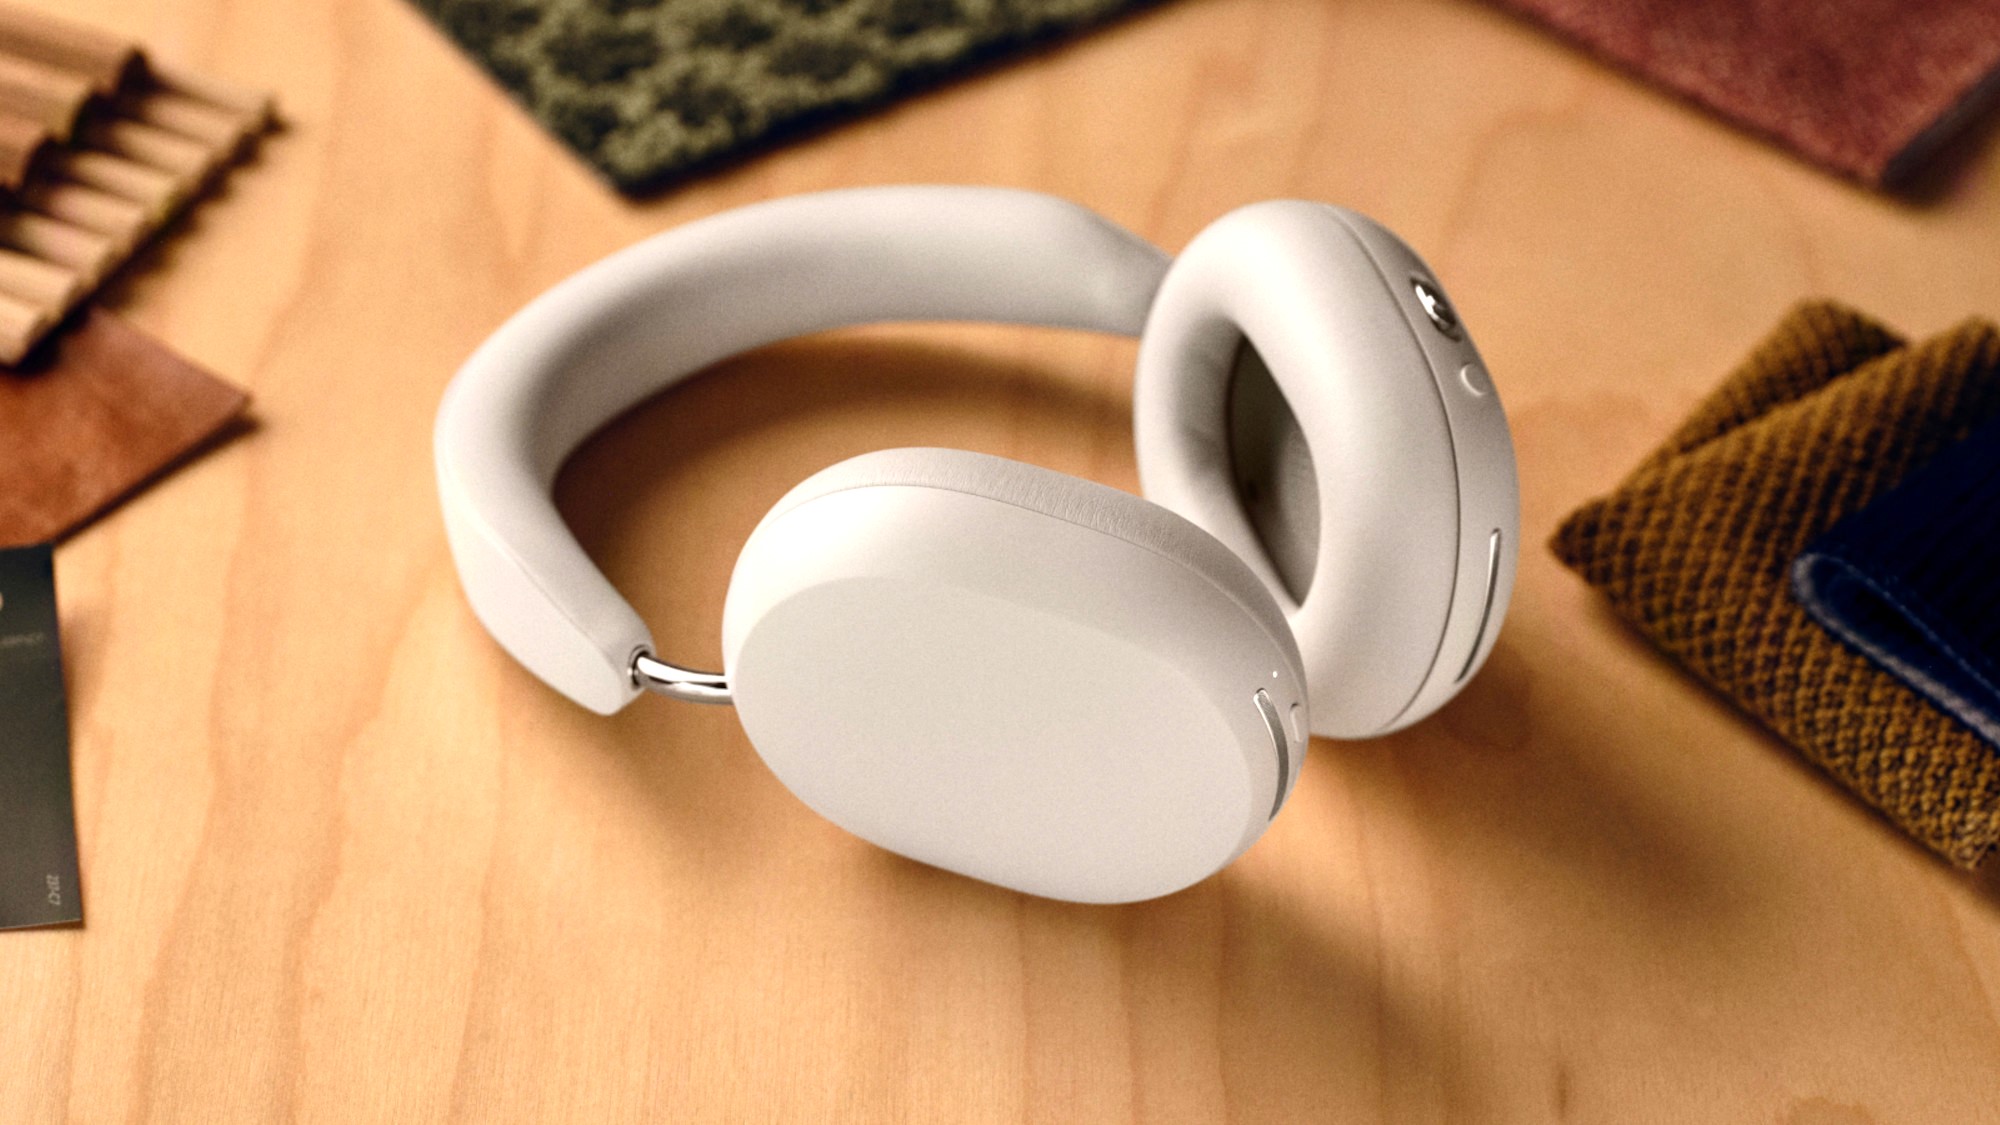 Sonos Ace headphones in white on a desk